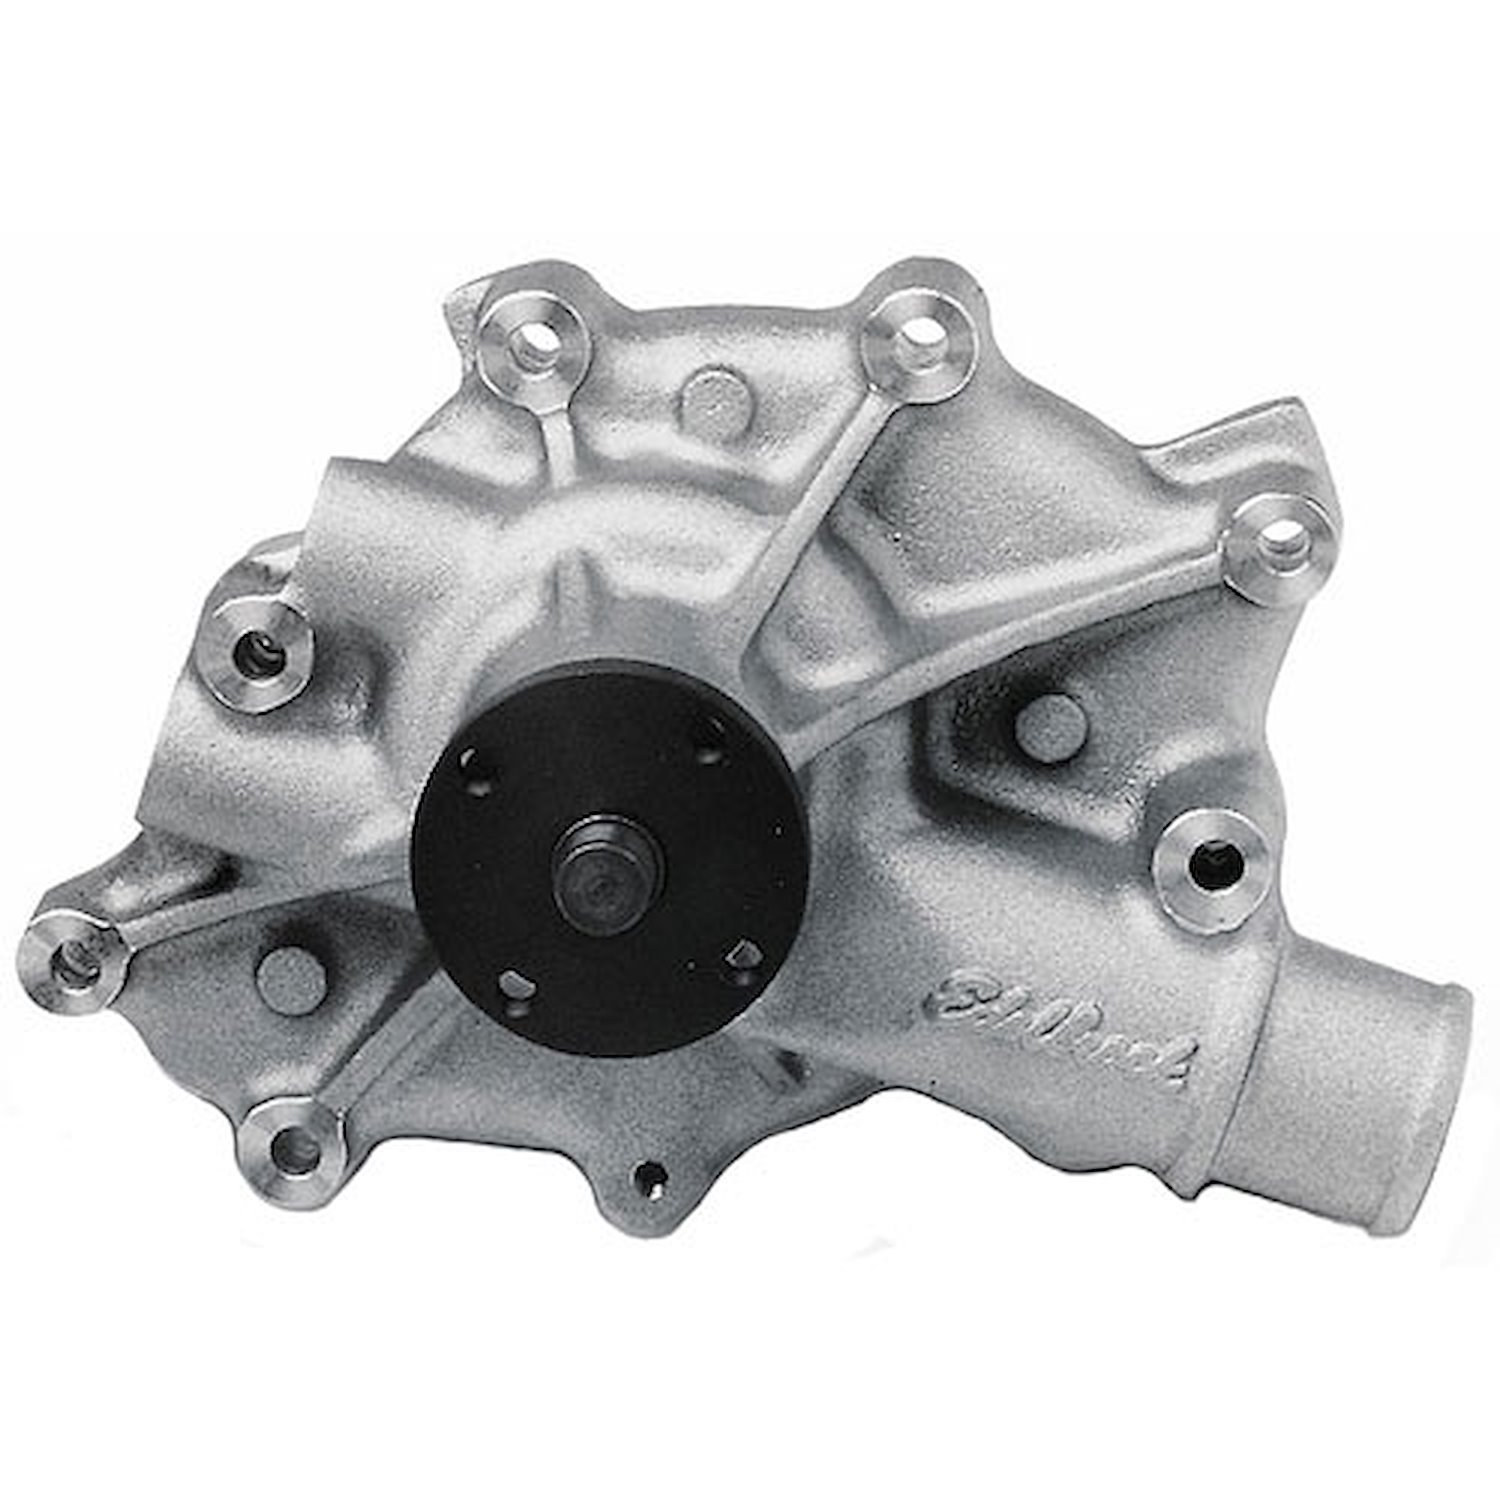 Victor Series Satin Aluminum Water Pump for 1986-1993 Ford 5.0L V8